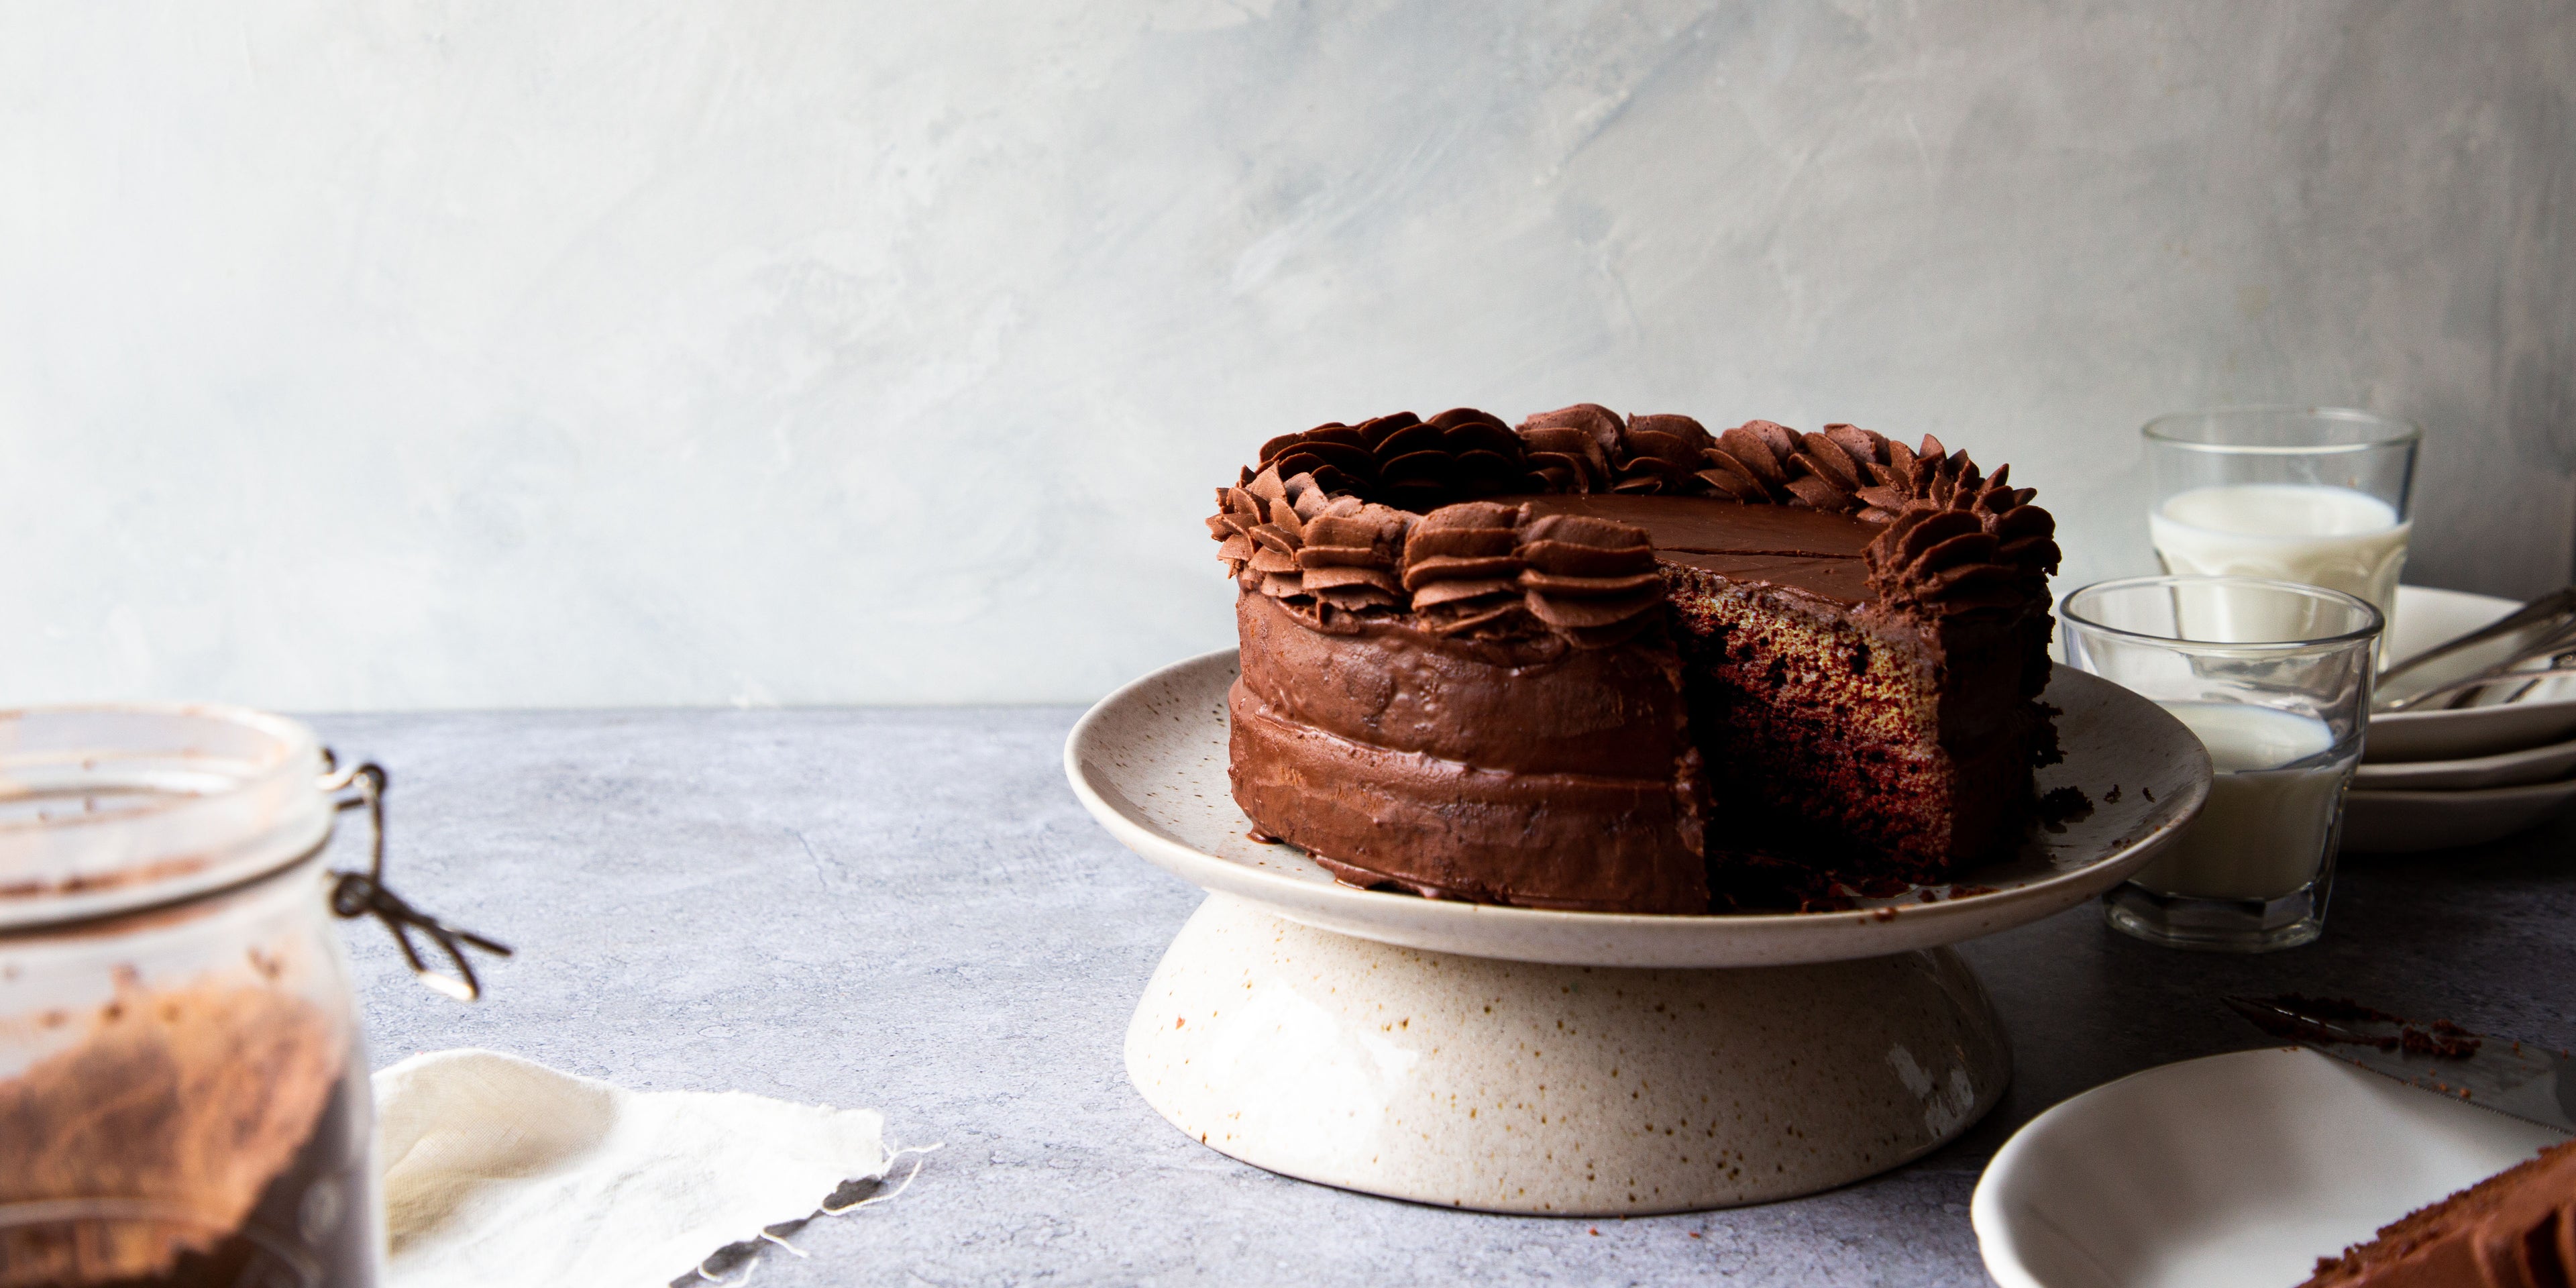 Classic Chocolate Cake on a cake stand with a slice cut out of it showing the rich layers inside